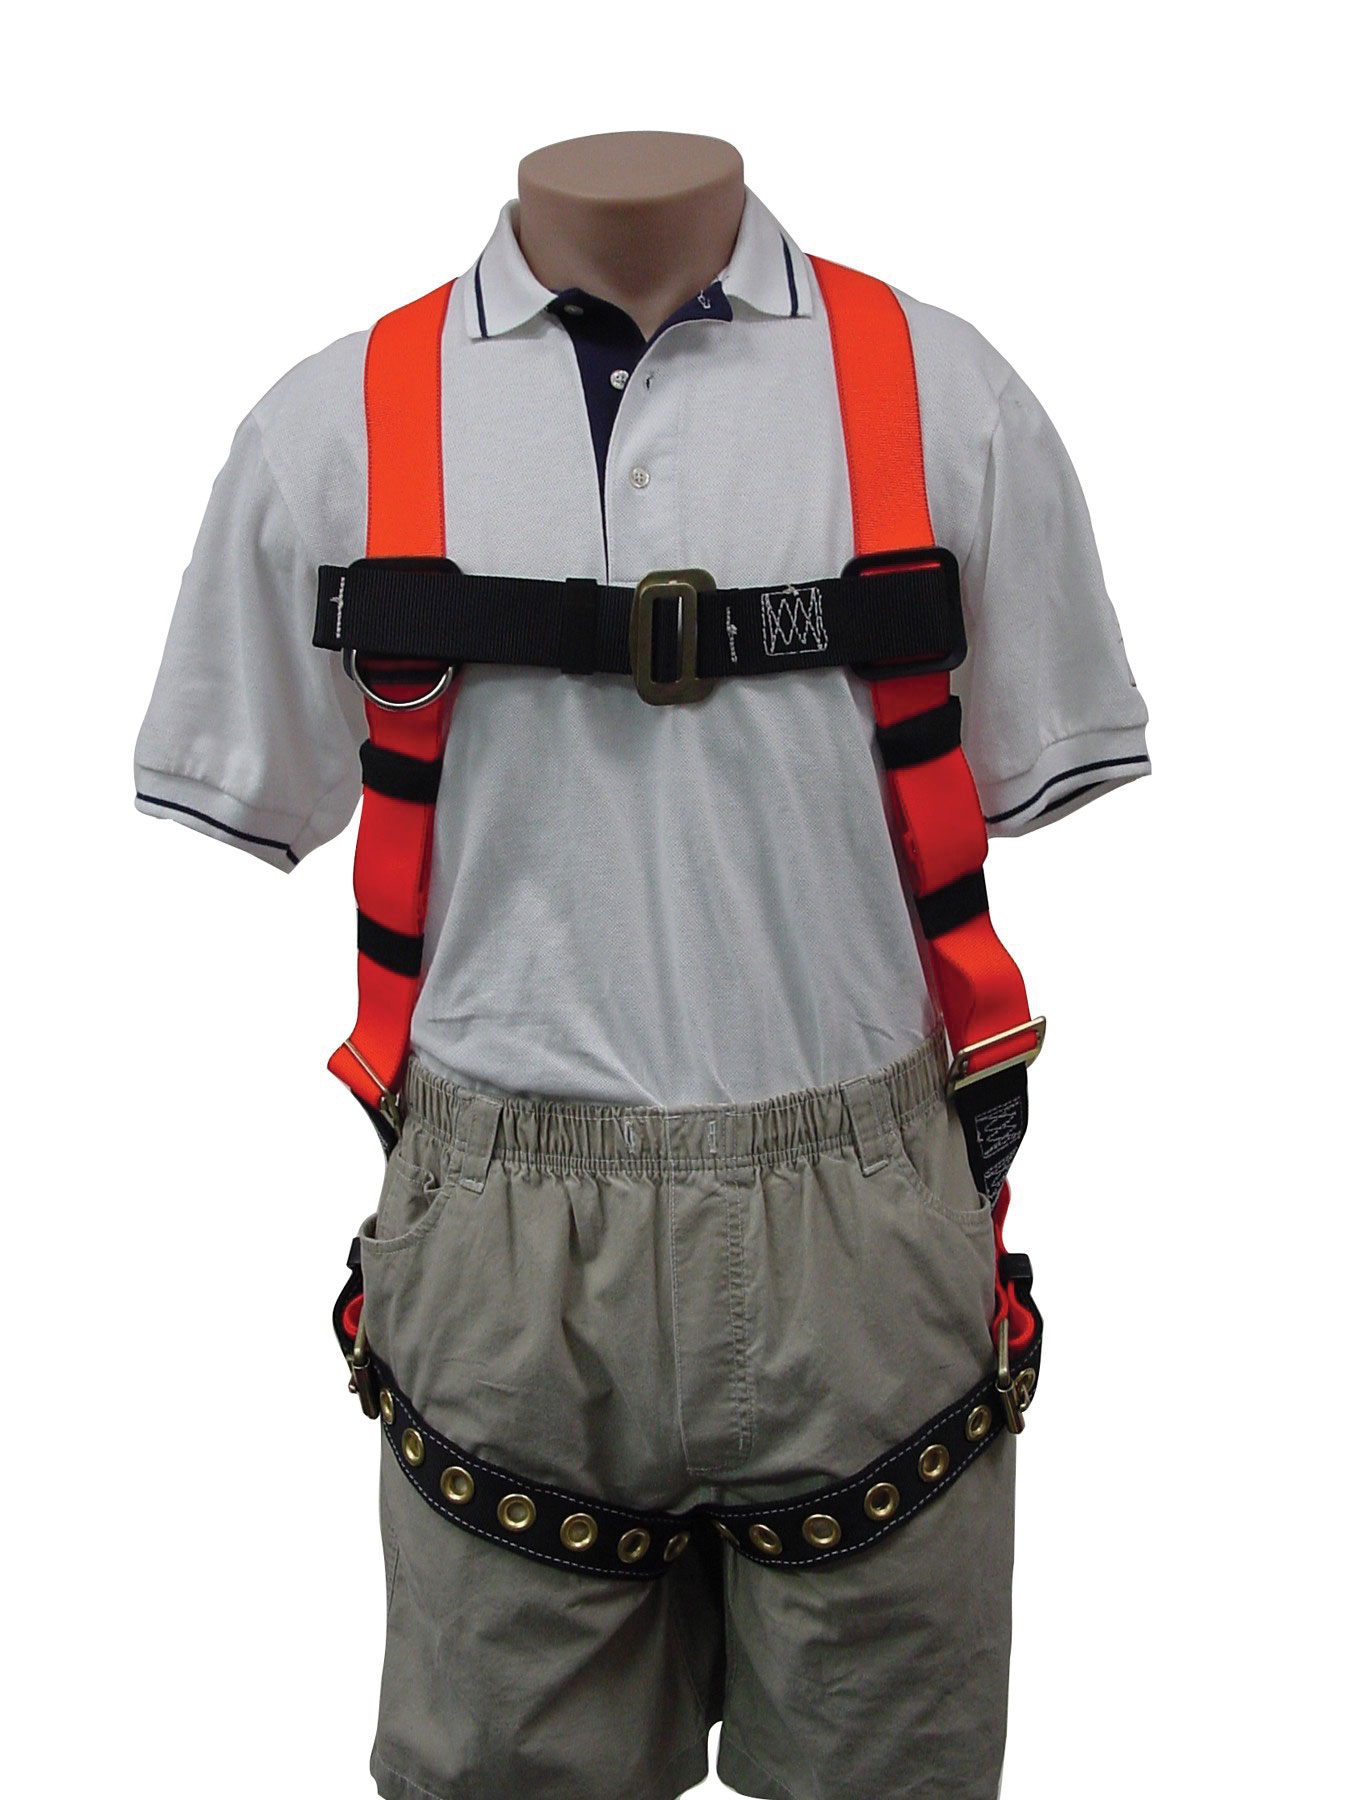 3M 1050-L-XL Feather Harness - L-XL, Single D-Ring, Tongue Buckle Legs